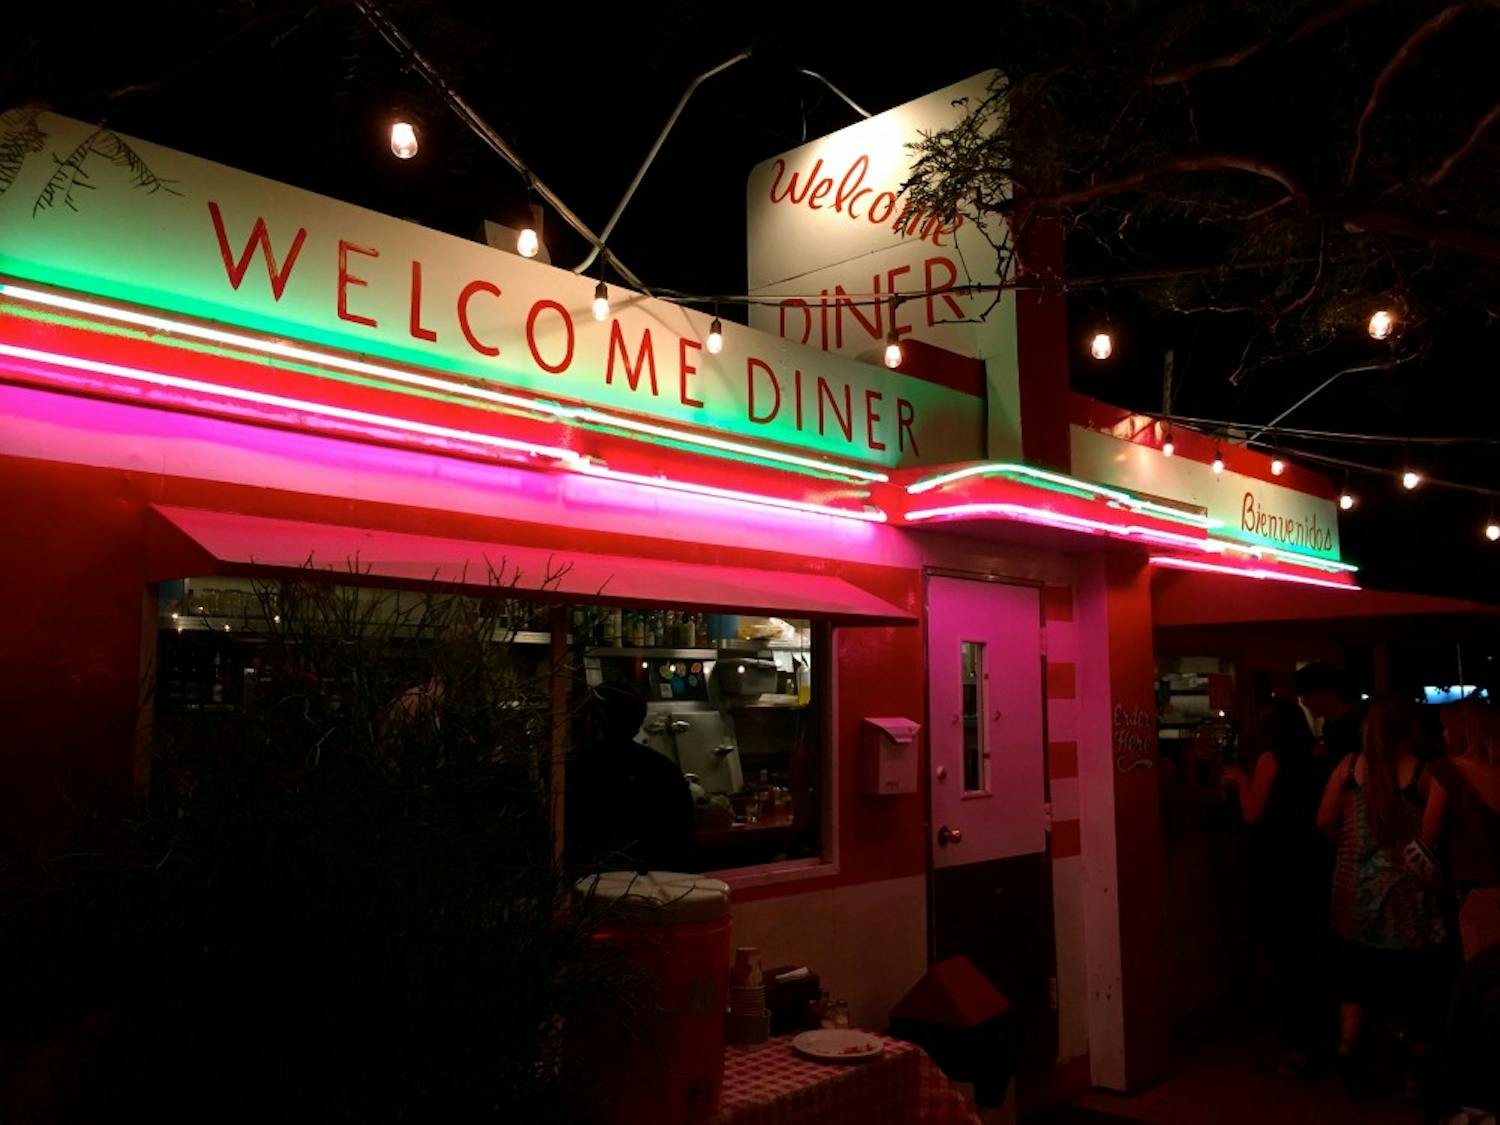 Welcome Diner